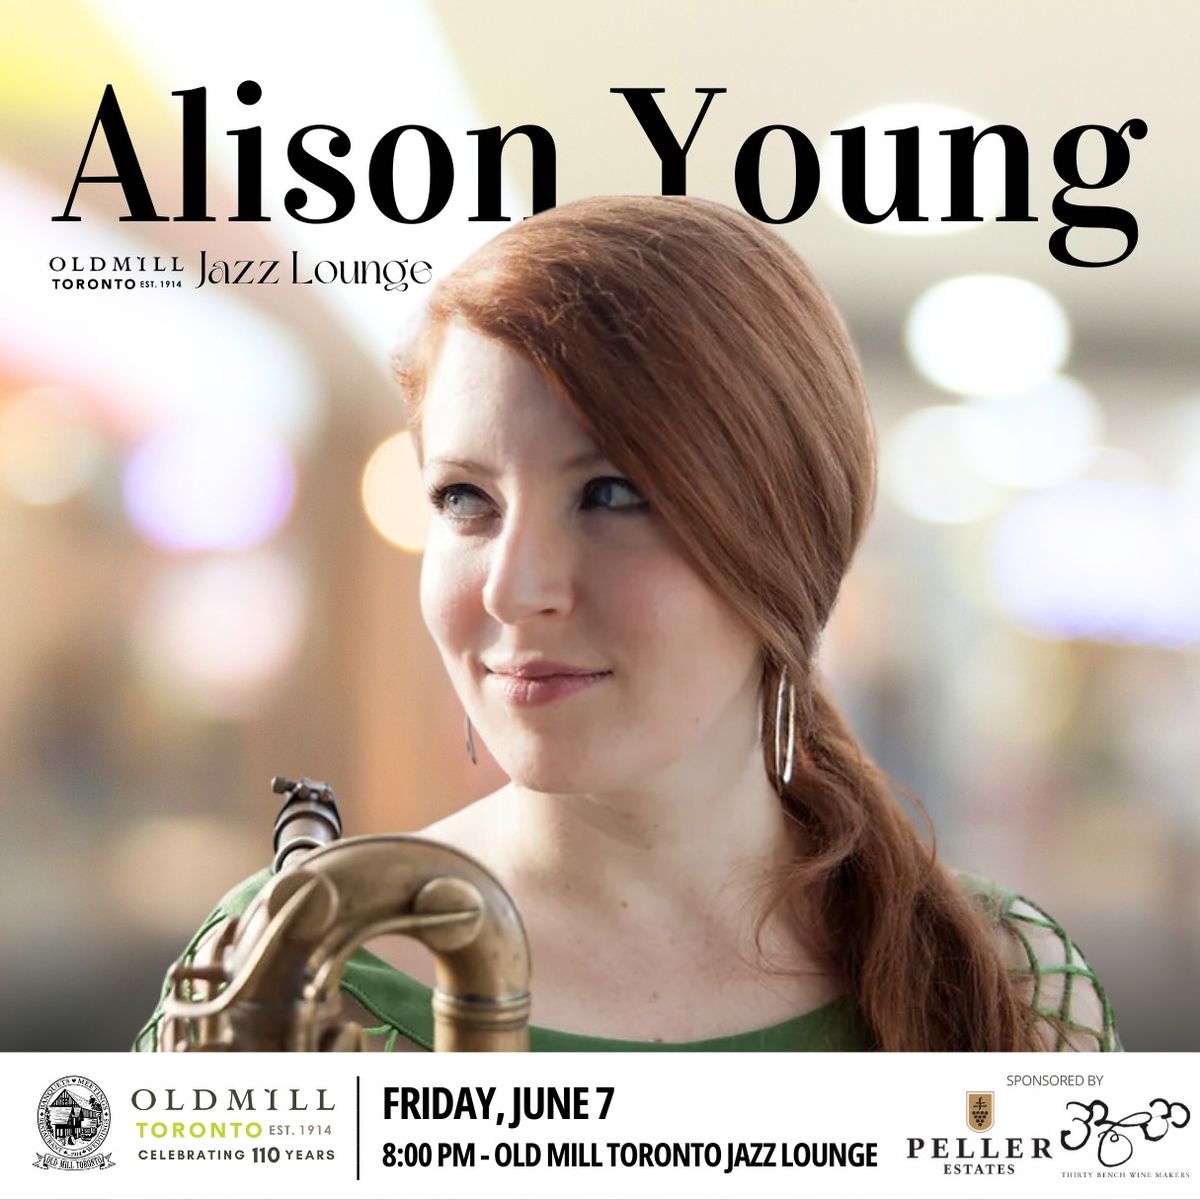 Alison Young - Old Mill Toronto Jazz Lounge 